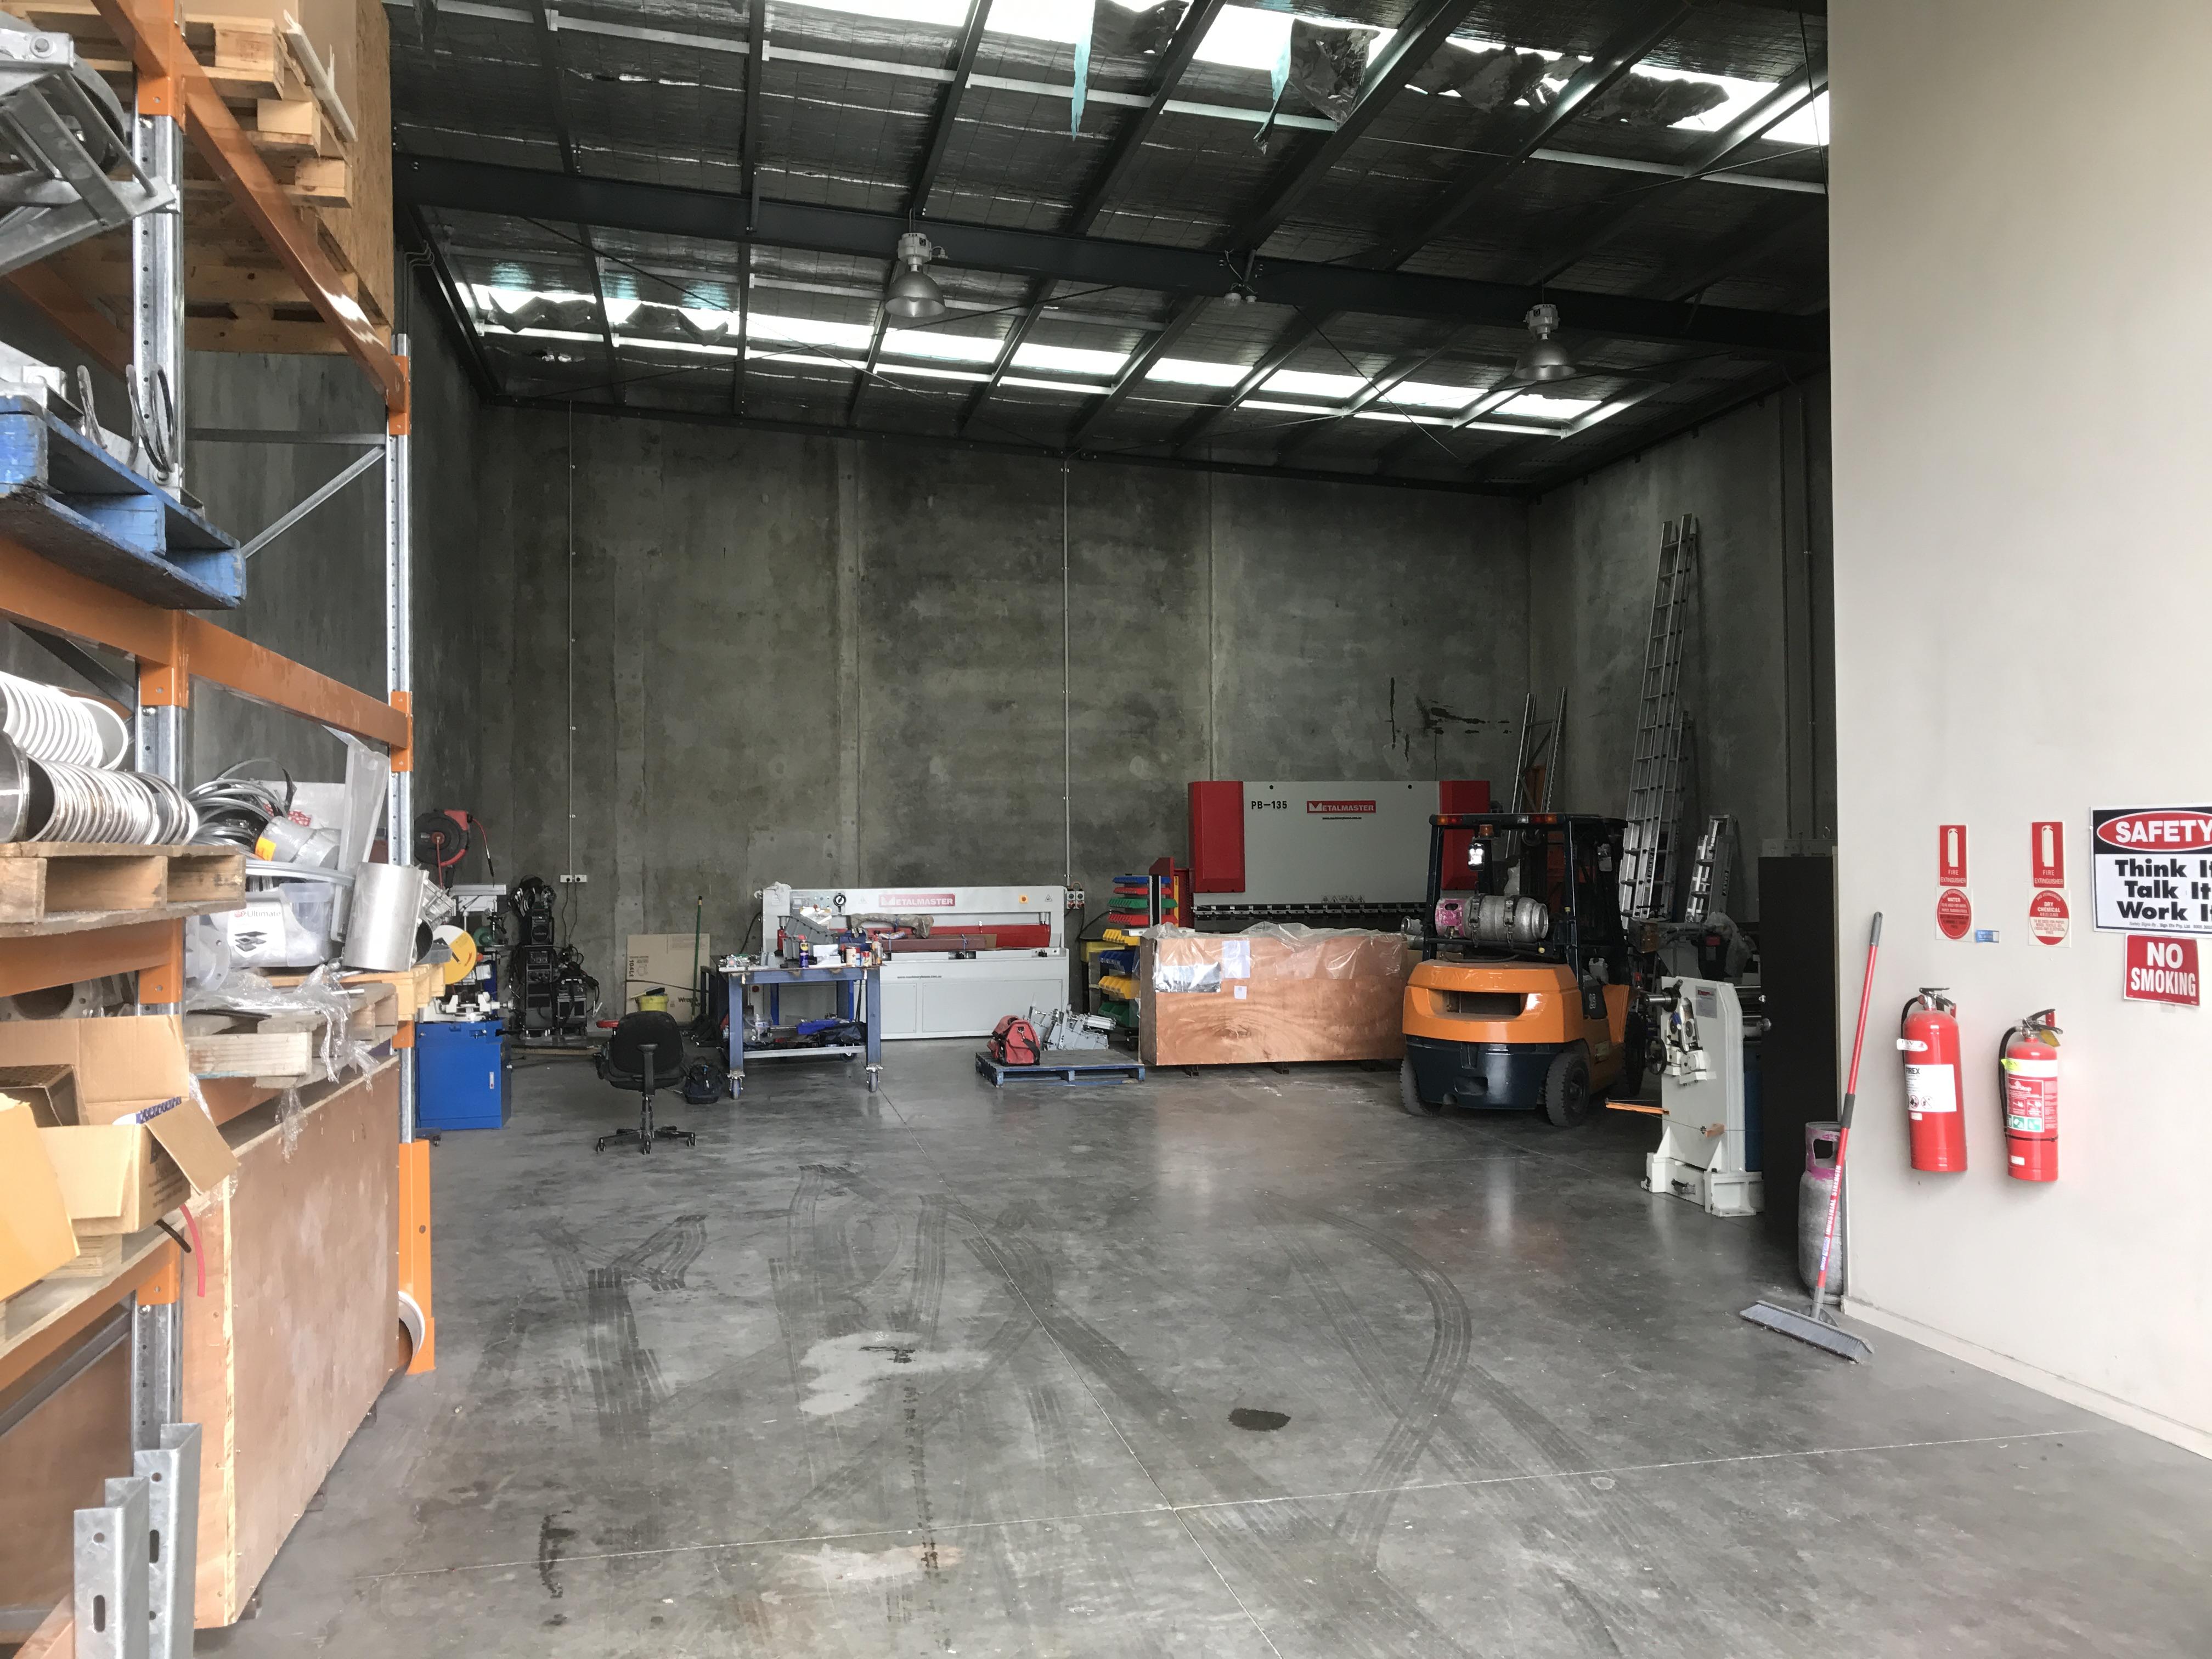 Manufacturing Business for Sale Thomastown Melbourne ...
